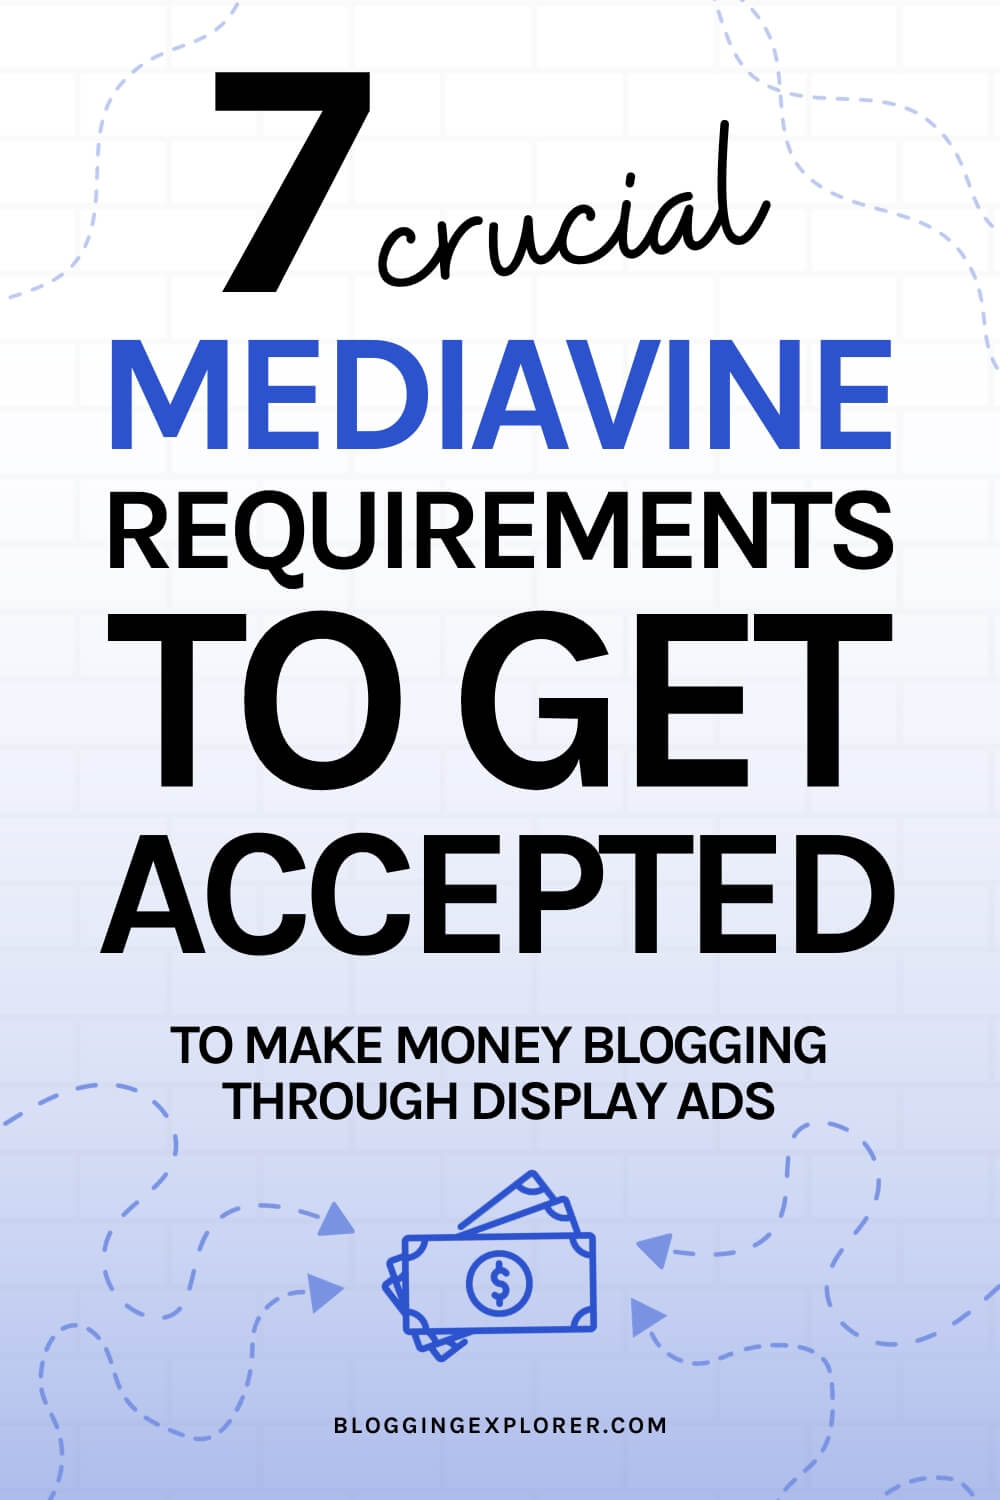 Mediavine requirements to get accepted into the Mediavine ad network